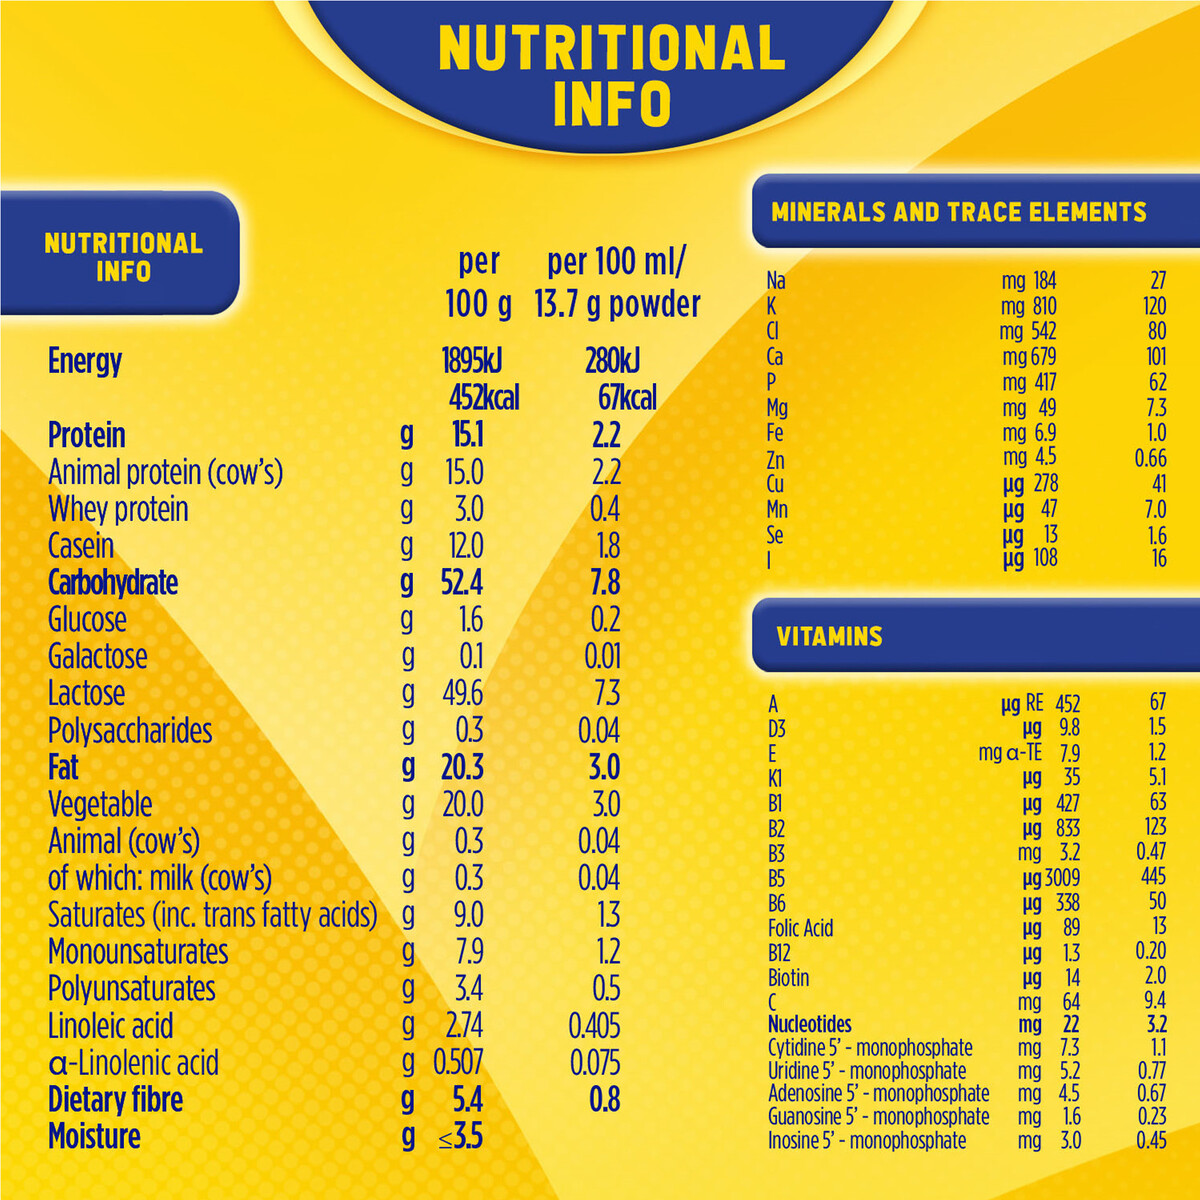 Bebelac Nutri 7in1 Follow On Formula Stage 1 From 6 to 12 Months 400g